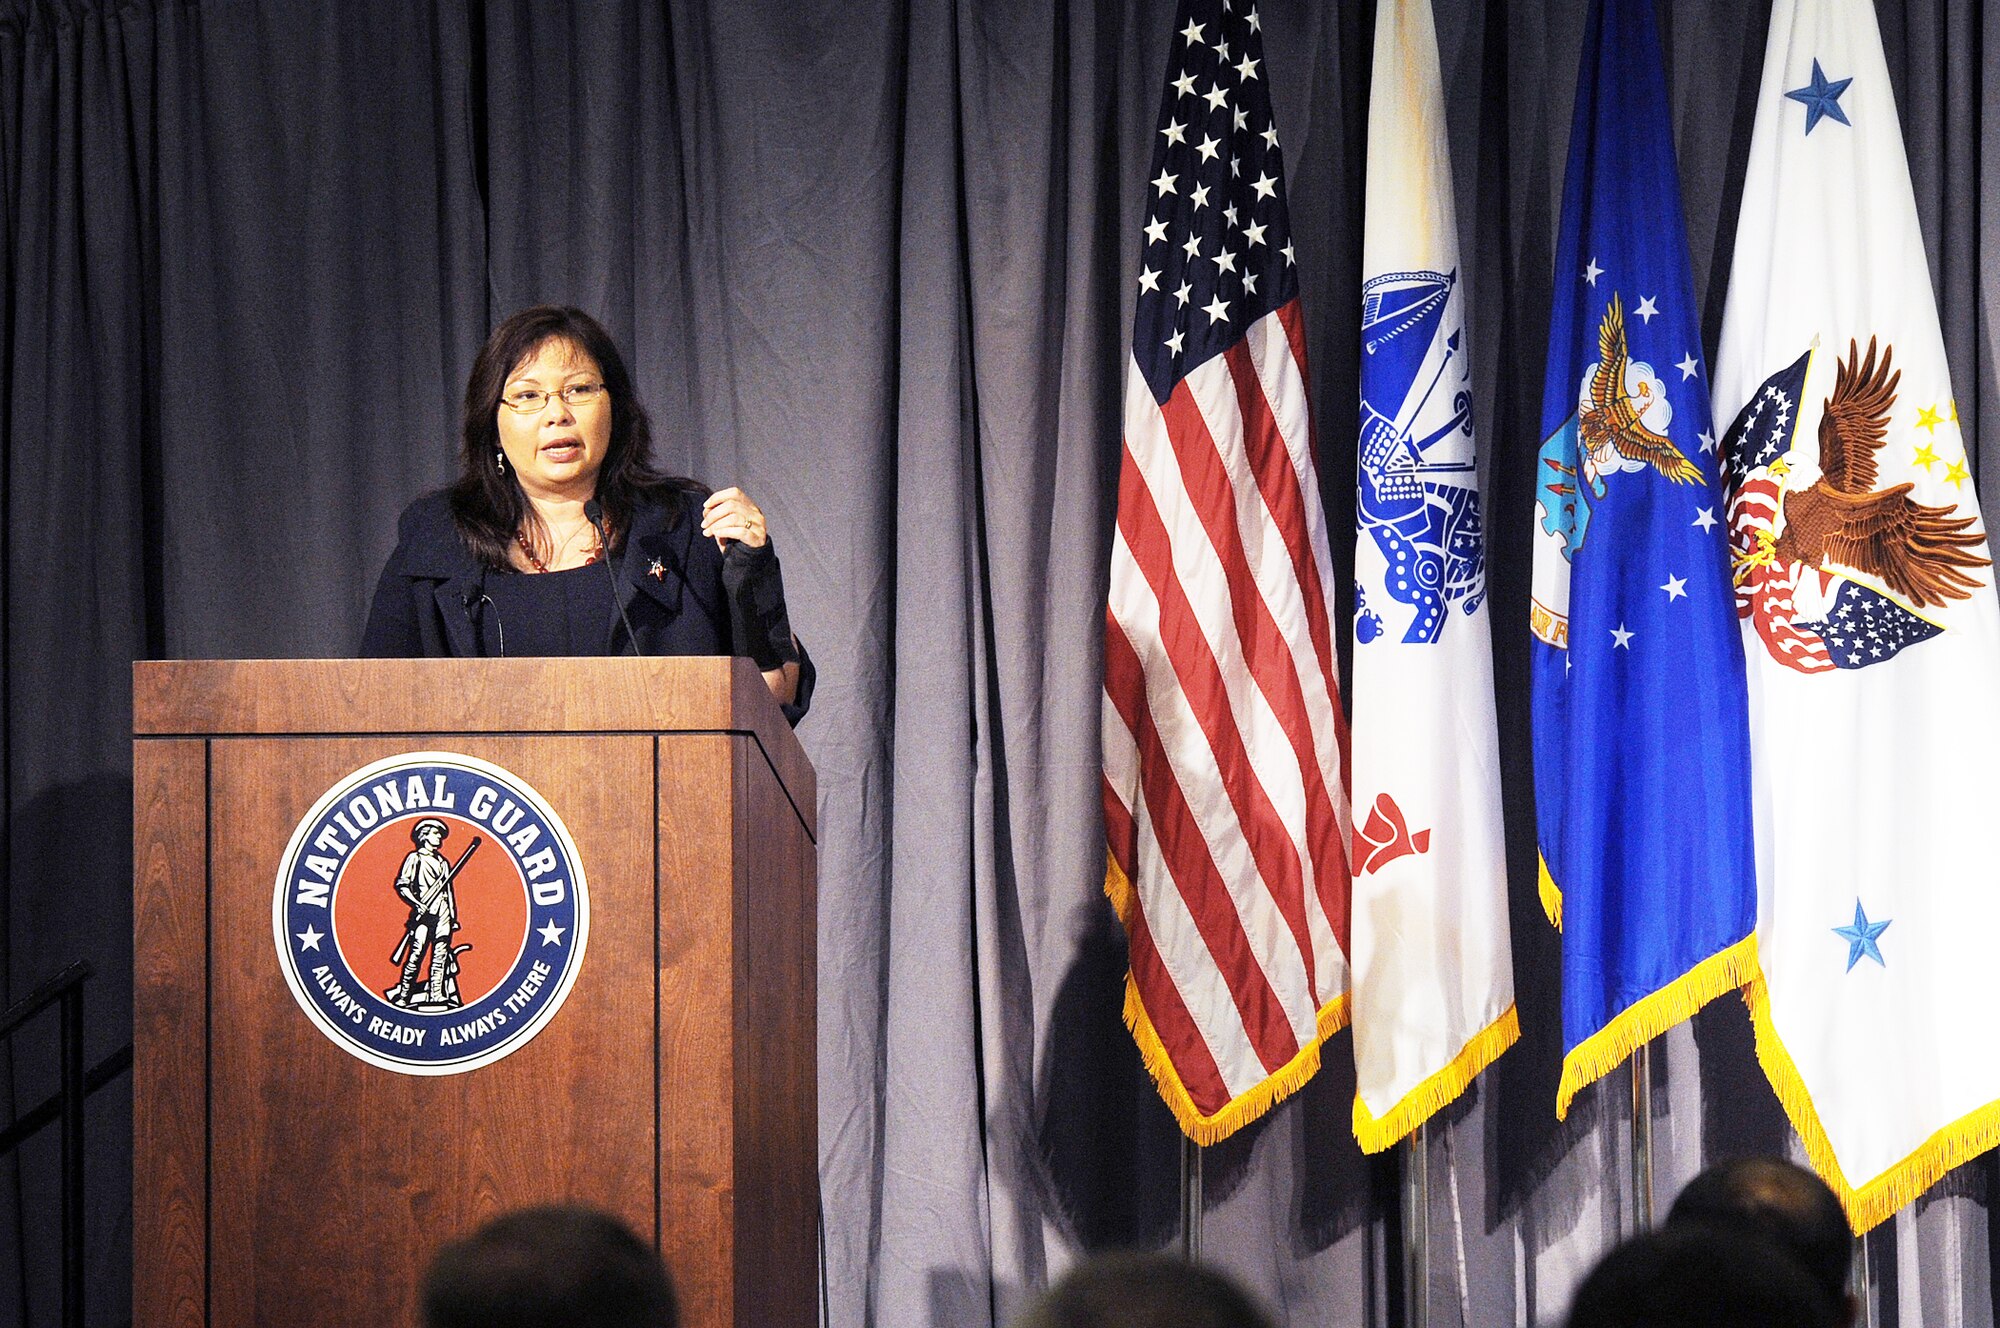 Tammy Duckworth, the assistant secretary of public and intergovernmental affairs for the Department of Veterans Affairs, speaks at the 2009 National Guard Bureau Public Affairs Training Workshop Oct. 27, 2009, in Landsdowne, Va. Ms. Duckworth addressed many of the recent changes made at the VA including a streamlined process for servicemembers to receive care, additional clinics, advancements in care for women and electronic medical records designed to follow the servicemember throughout his or her career. (U.S. Army photo/Sgt. 1st Class Jon Soucy)